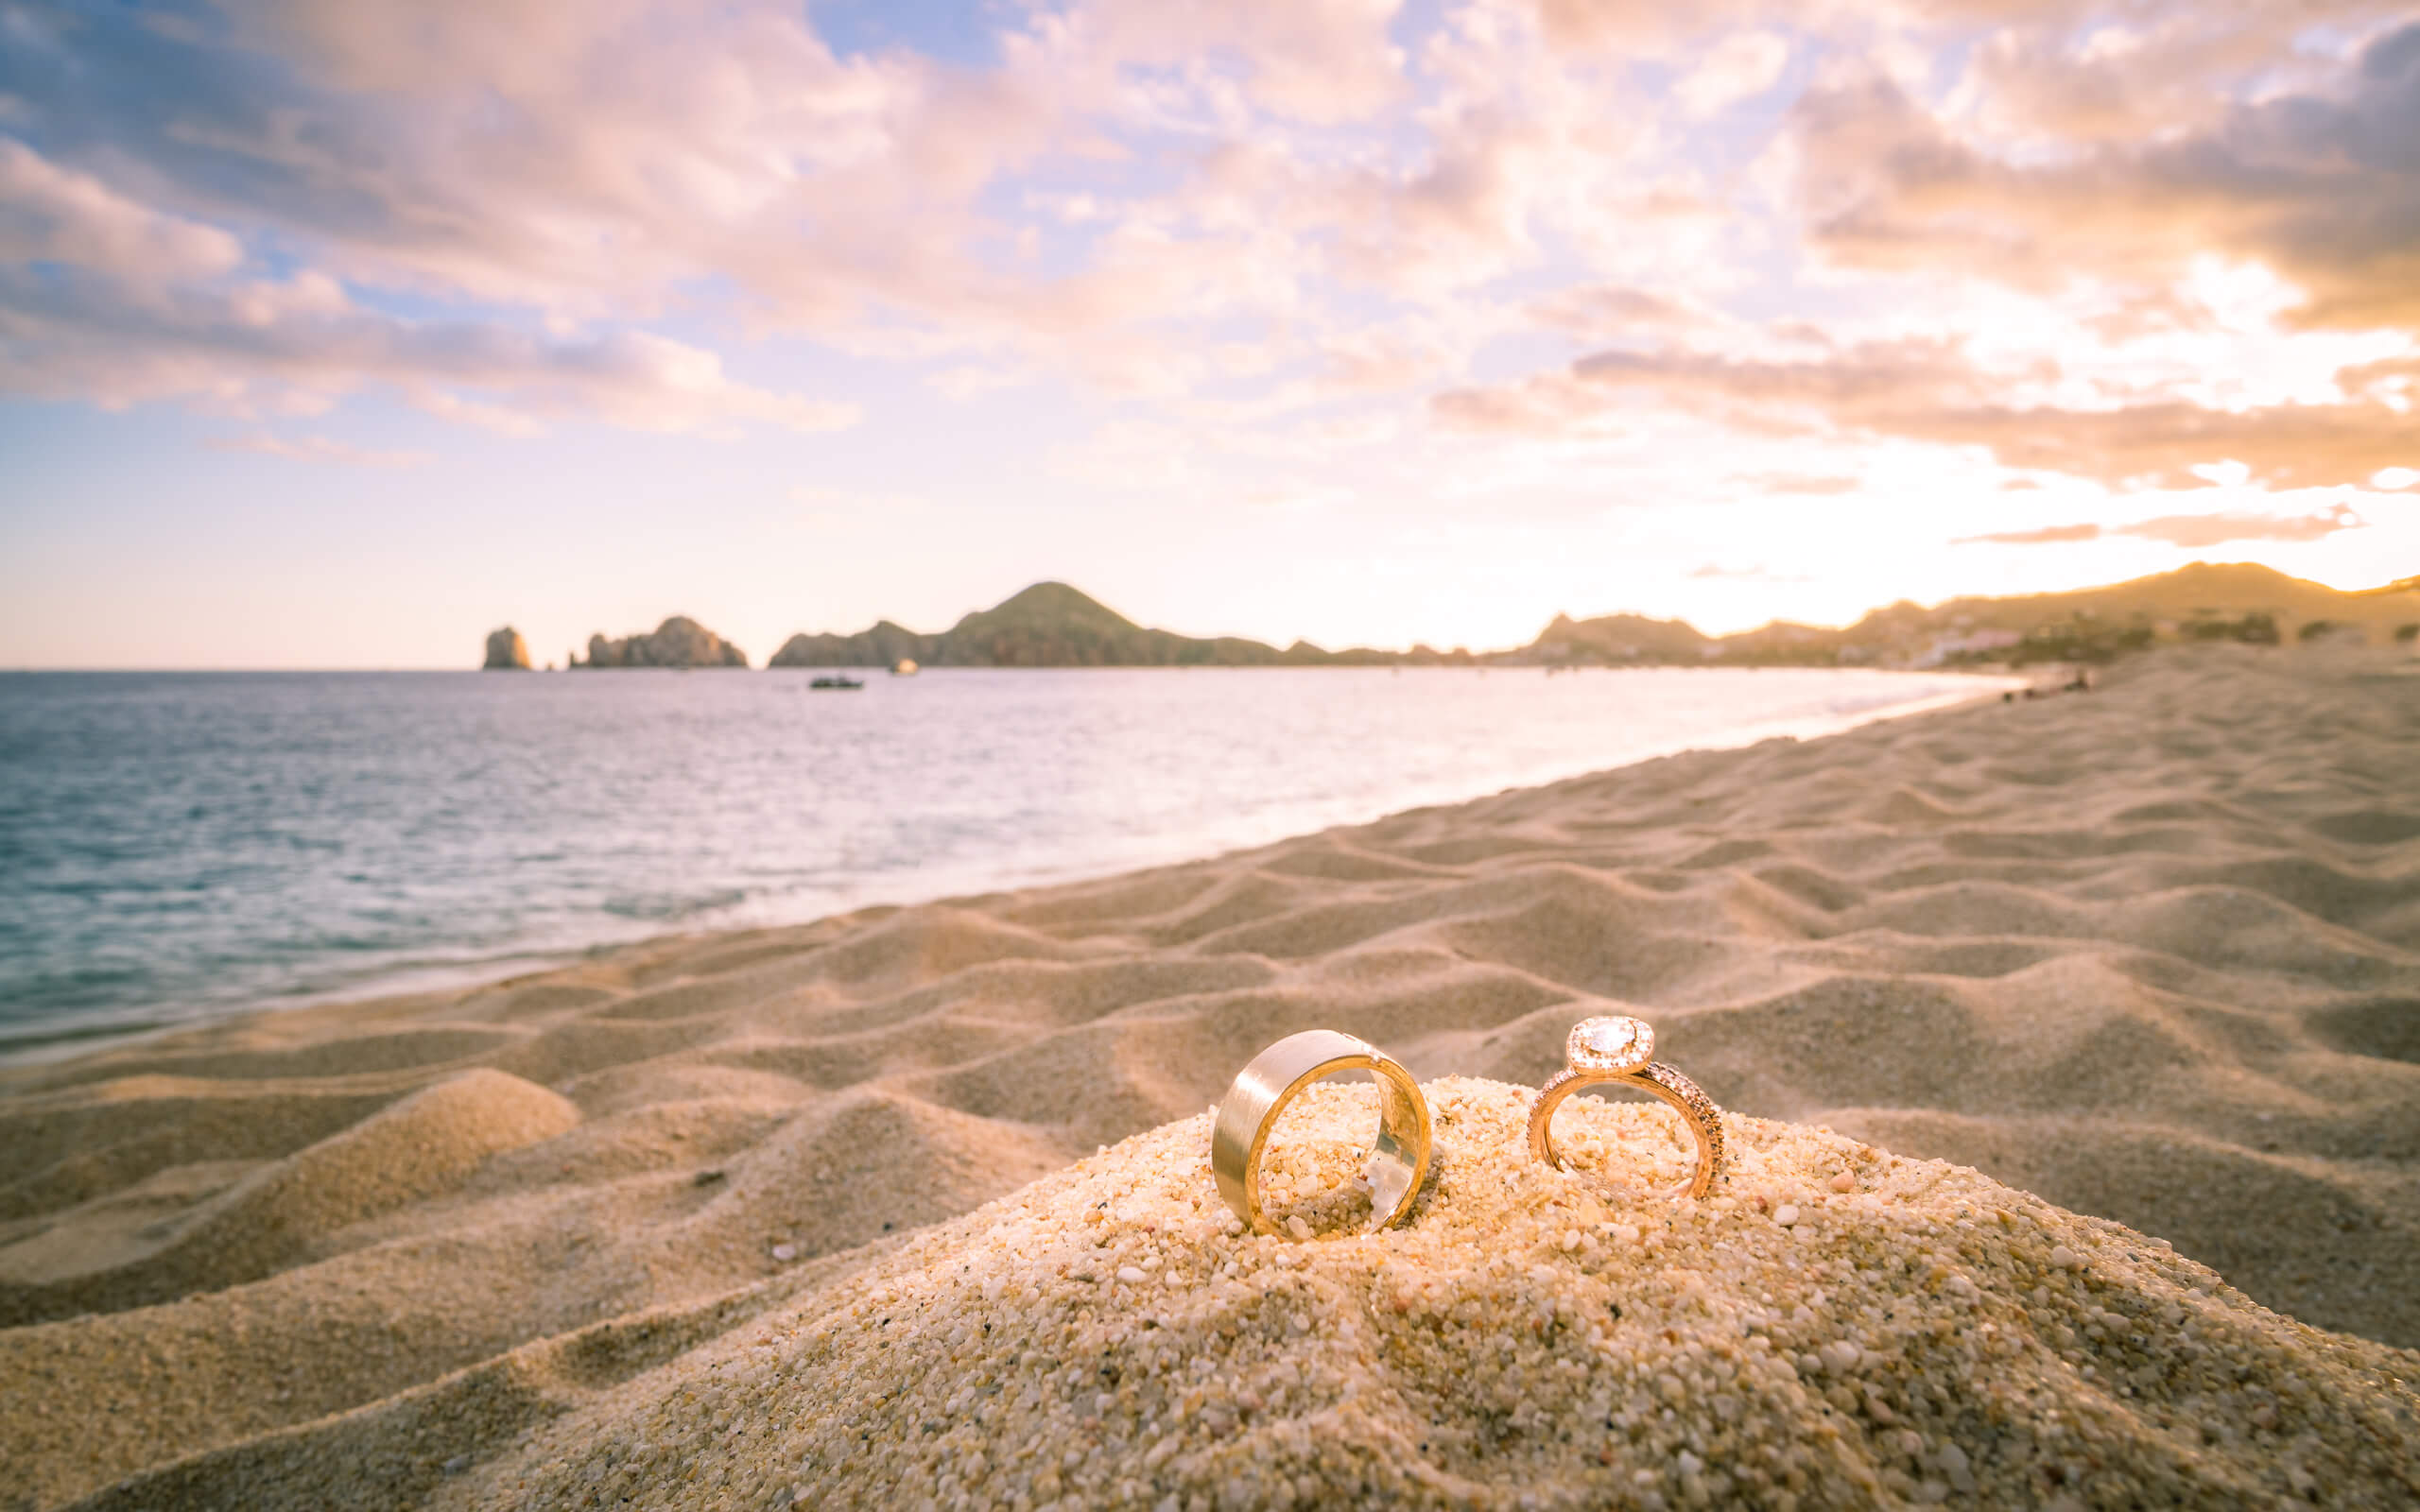 Photo Portfolio. Feature LIFELIGHTLENS Image of rings in the Cabo San Lucas sand during a destination wedding